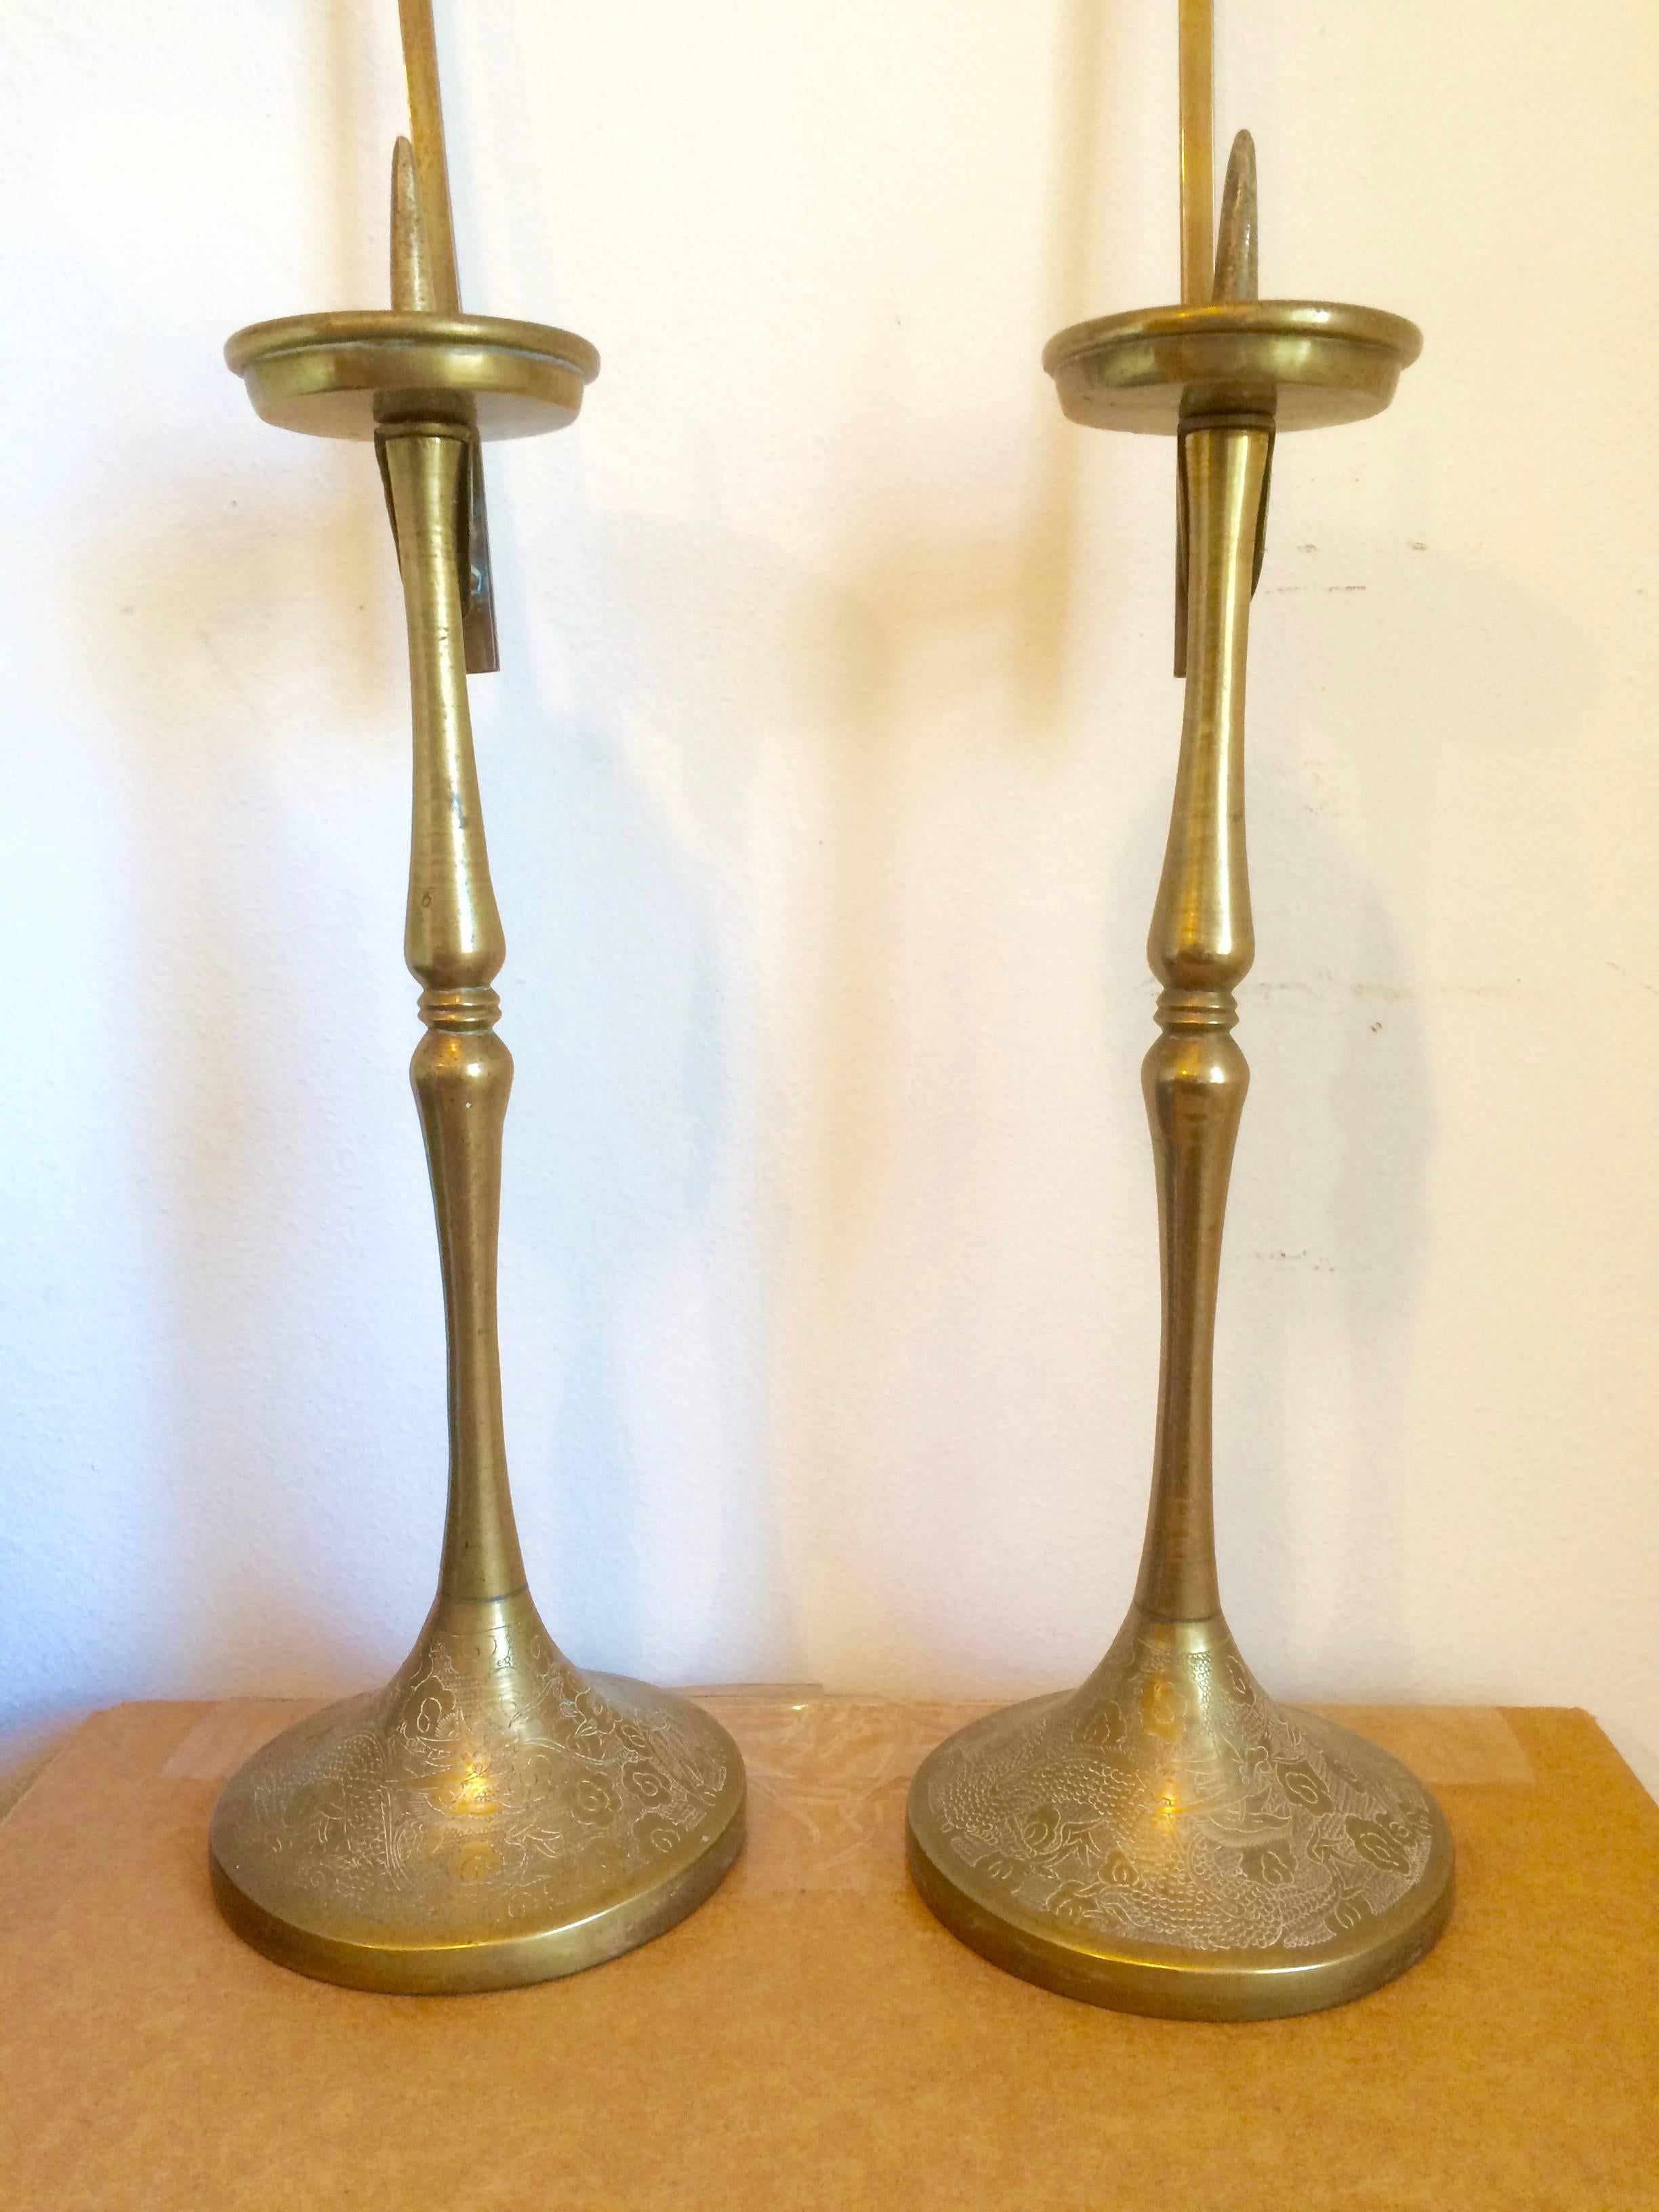 Pair of 19th century Korean, Choson brass candlesticks with etched decoration and butterfly reflectors. The candlesticks come apart into four sections.

Provenance: Luther Carrington Goodrich, 1894-1984. An American sinologist and historian of